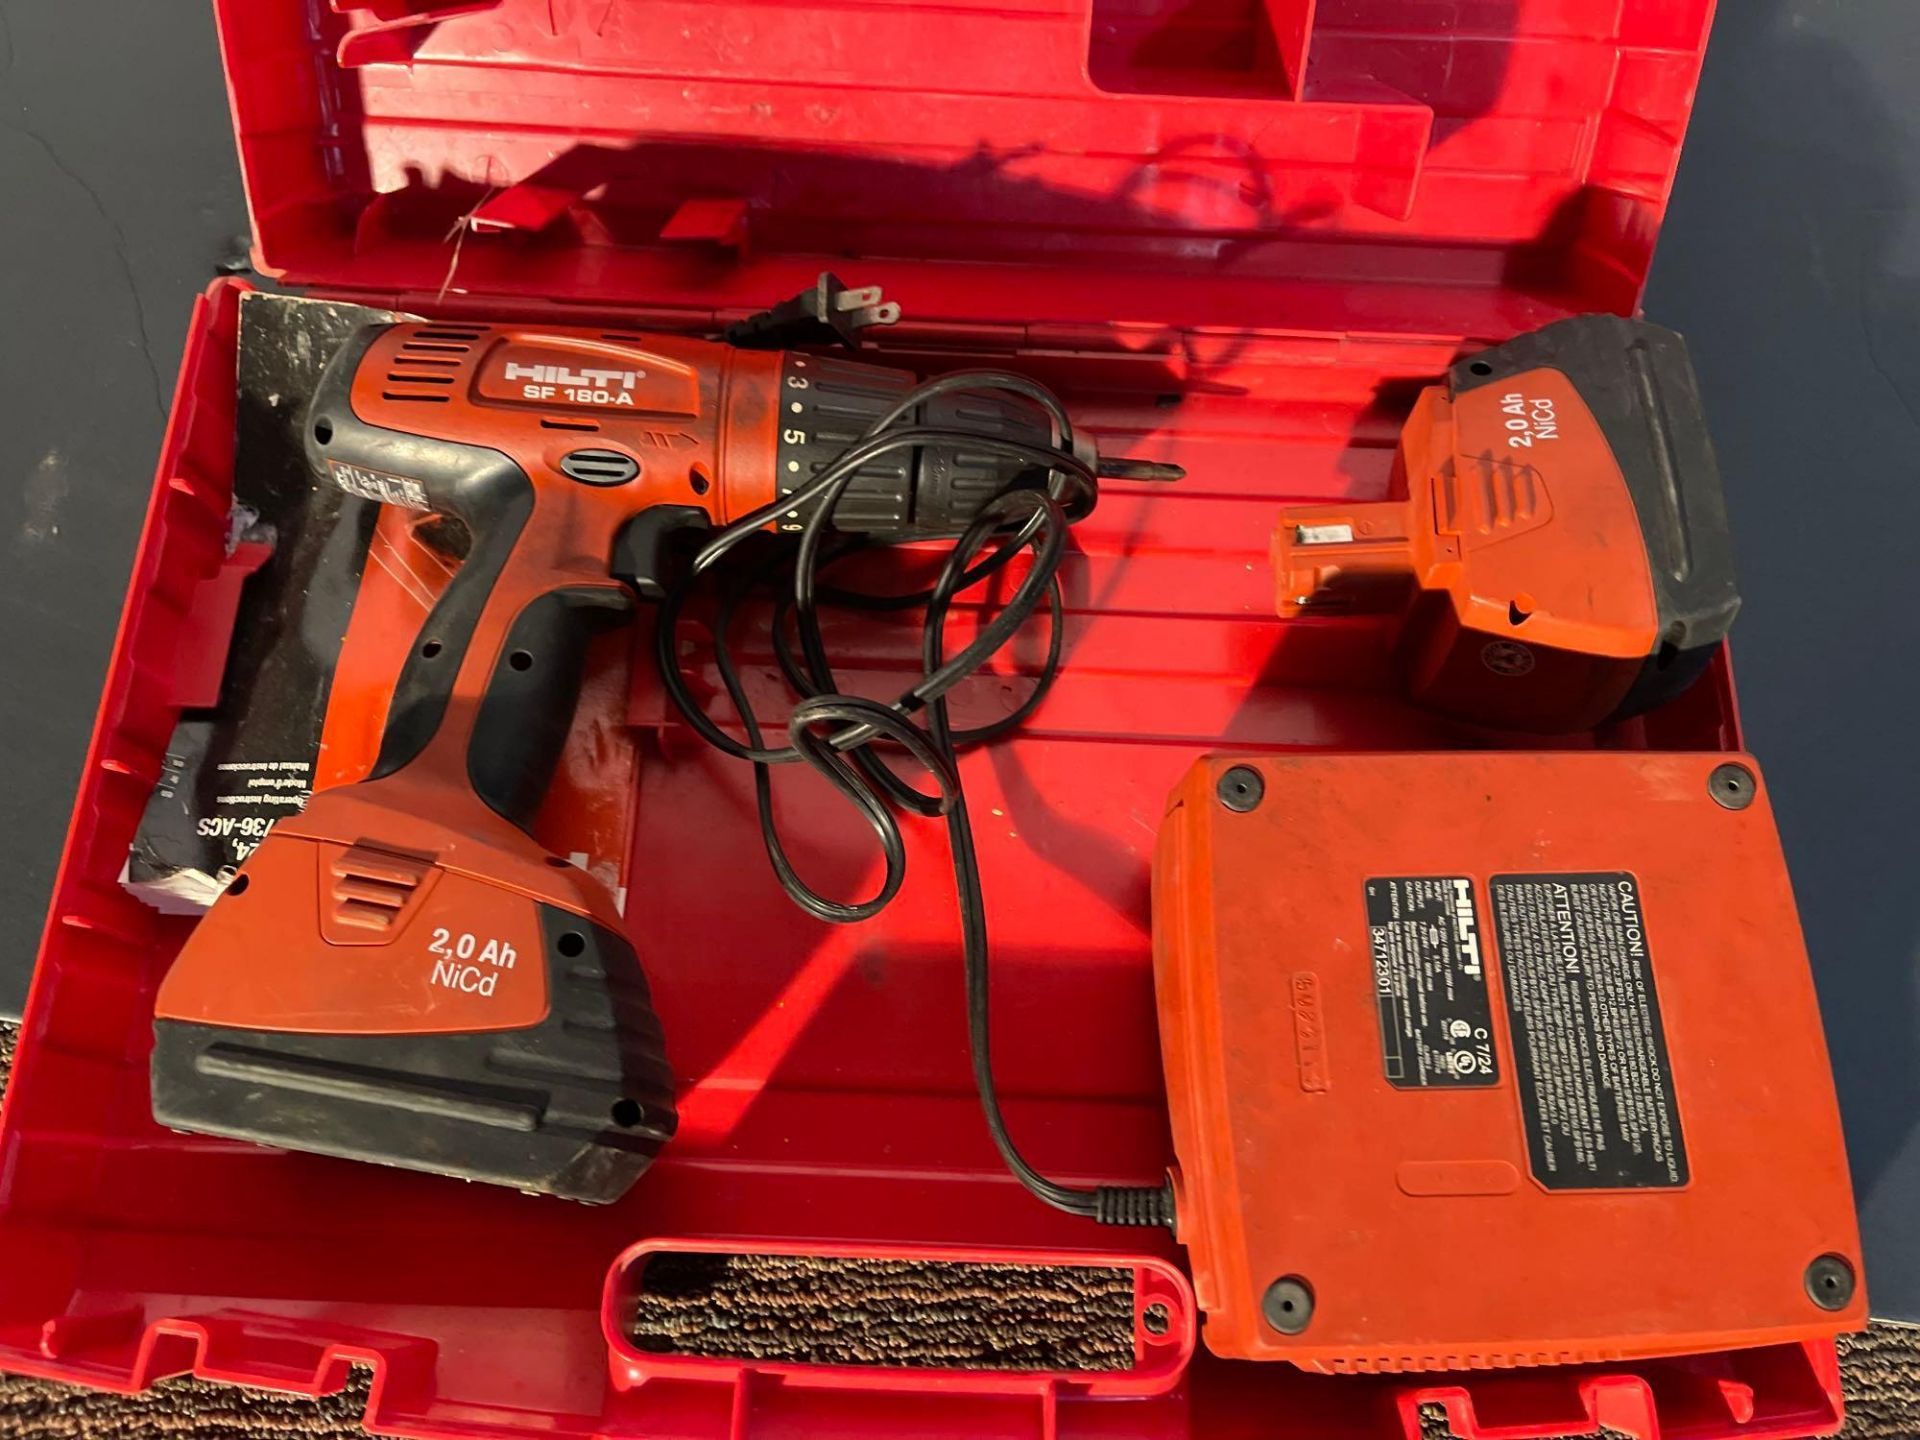 Hilti SF180-A Drill w/ (2) Batteries and Charger